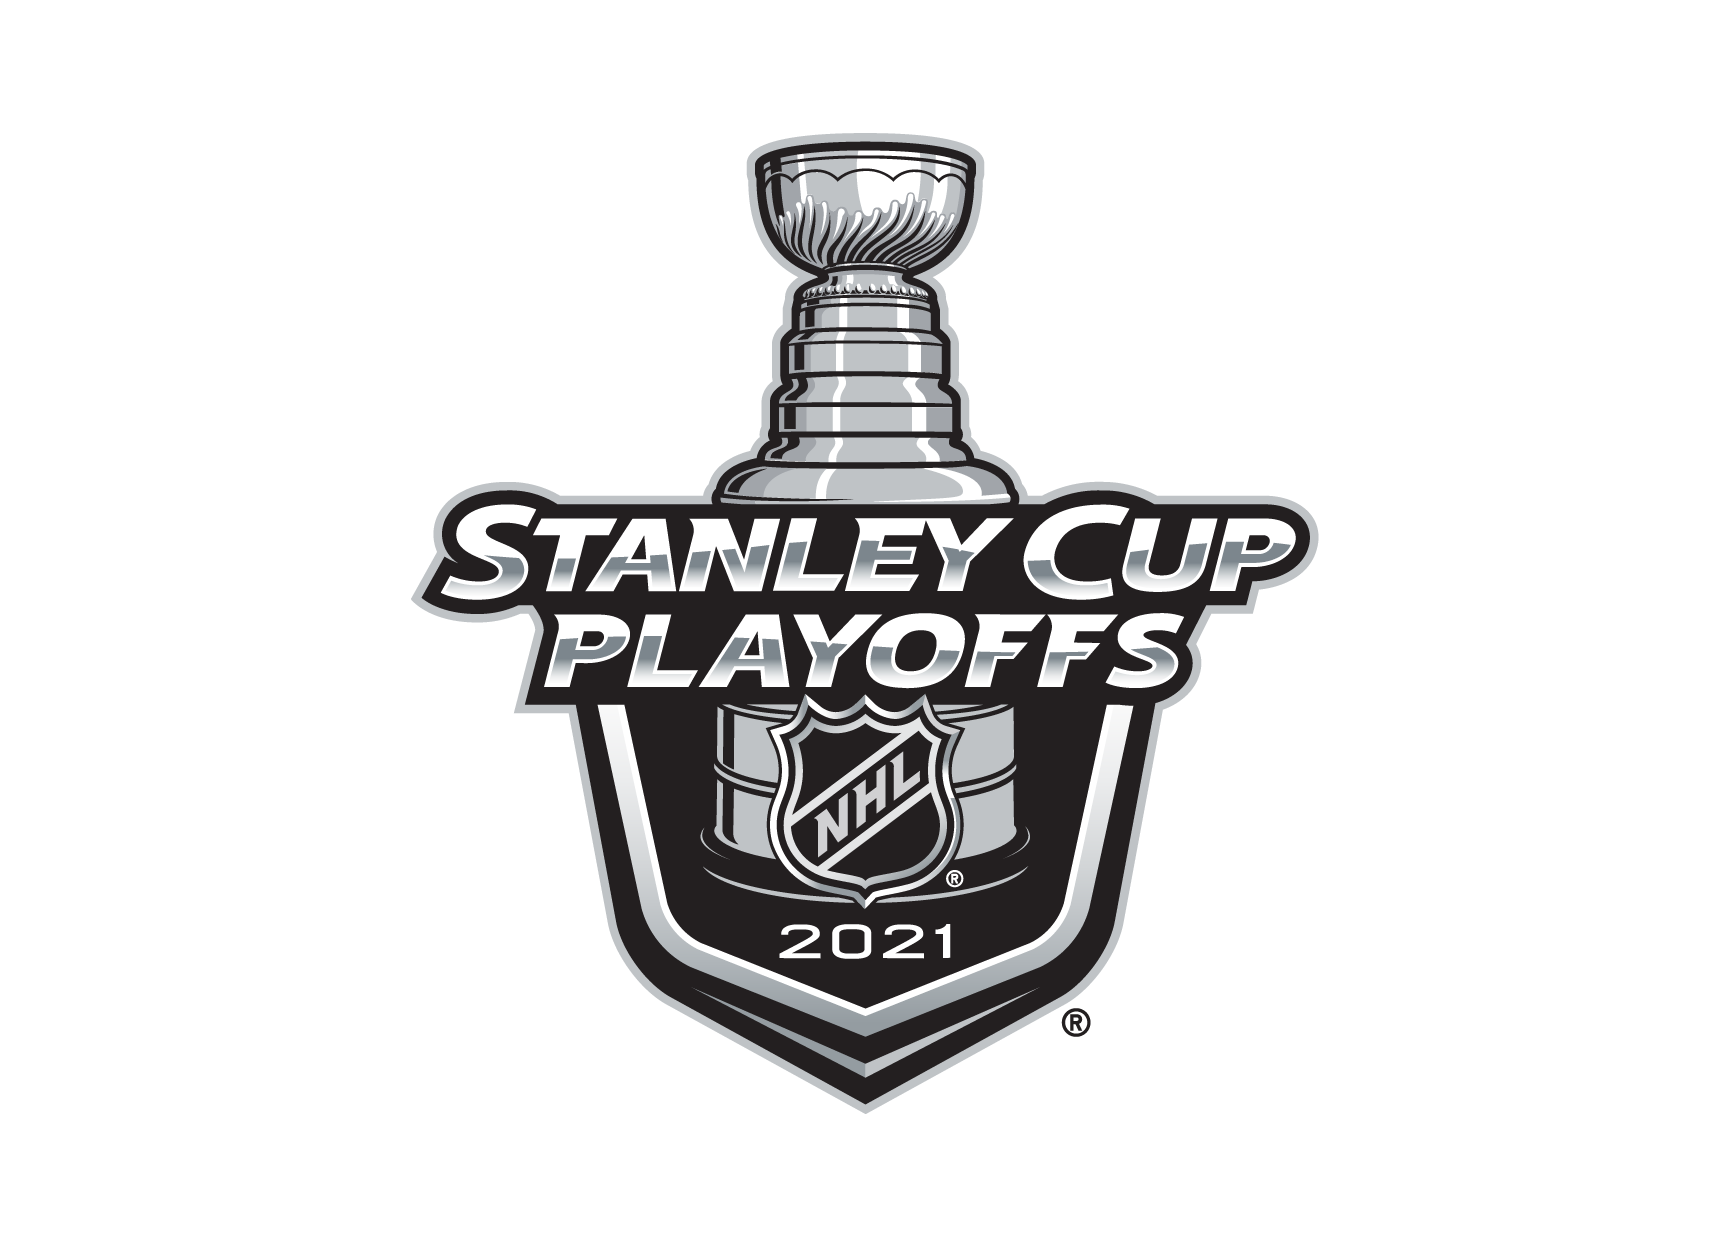 Download Stanley Cup Playoff Logo PNG and Vector (PDF, SVG, Ai, EPS) Free